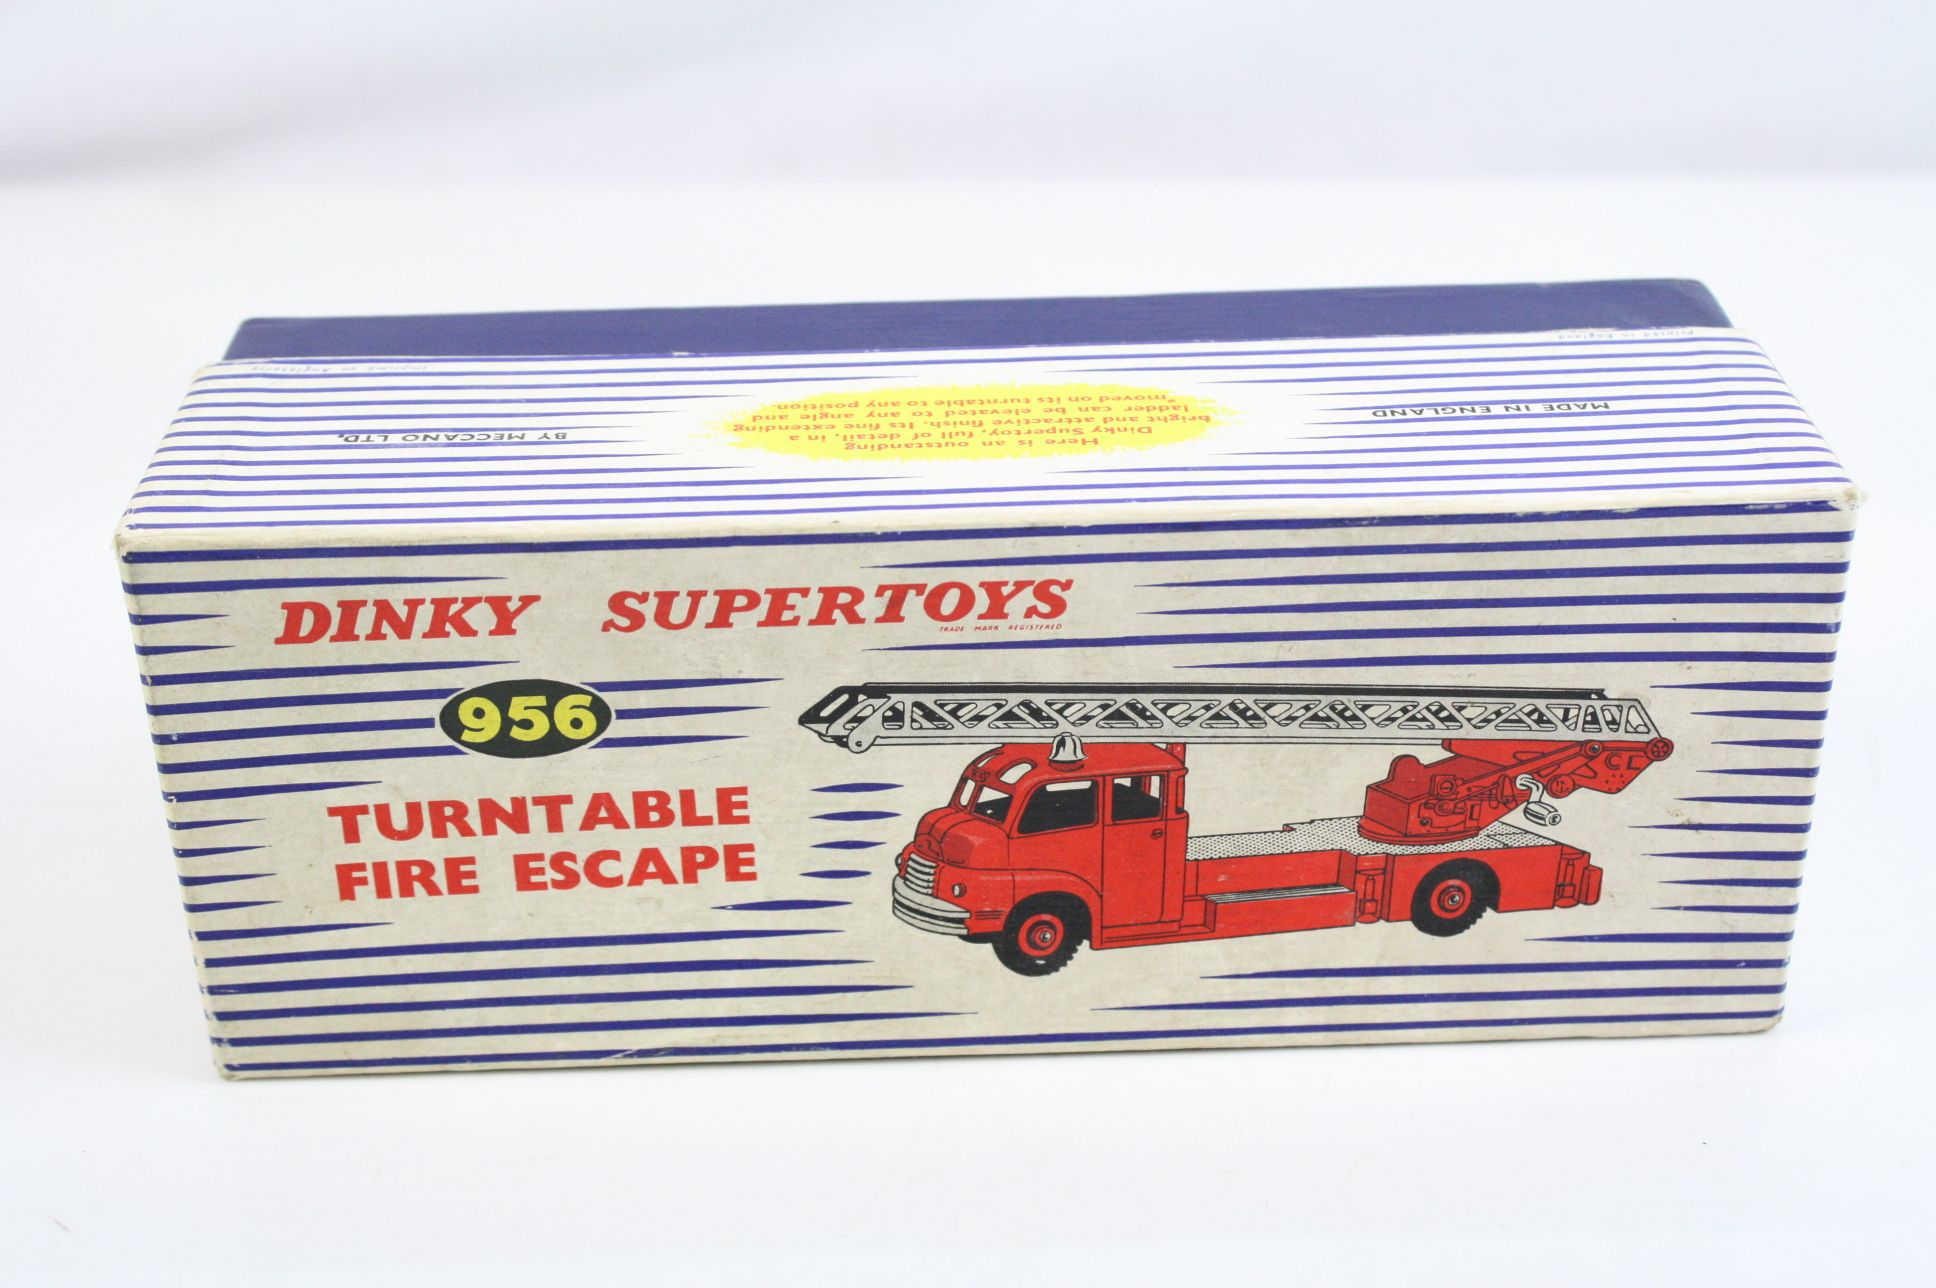 Boxed Dinky 956 Turntable Fire Escape diecast model with instructions, diecast vg with a few paint - Image 5 of 5